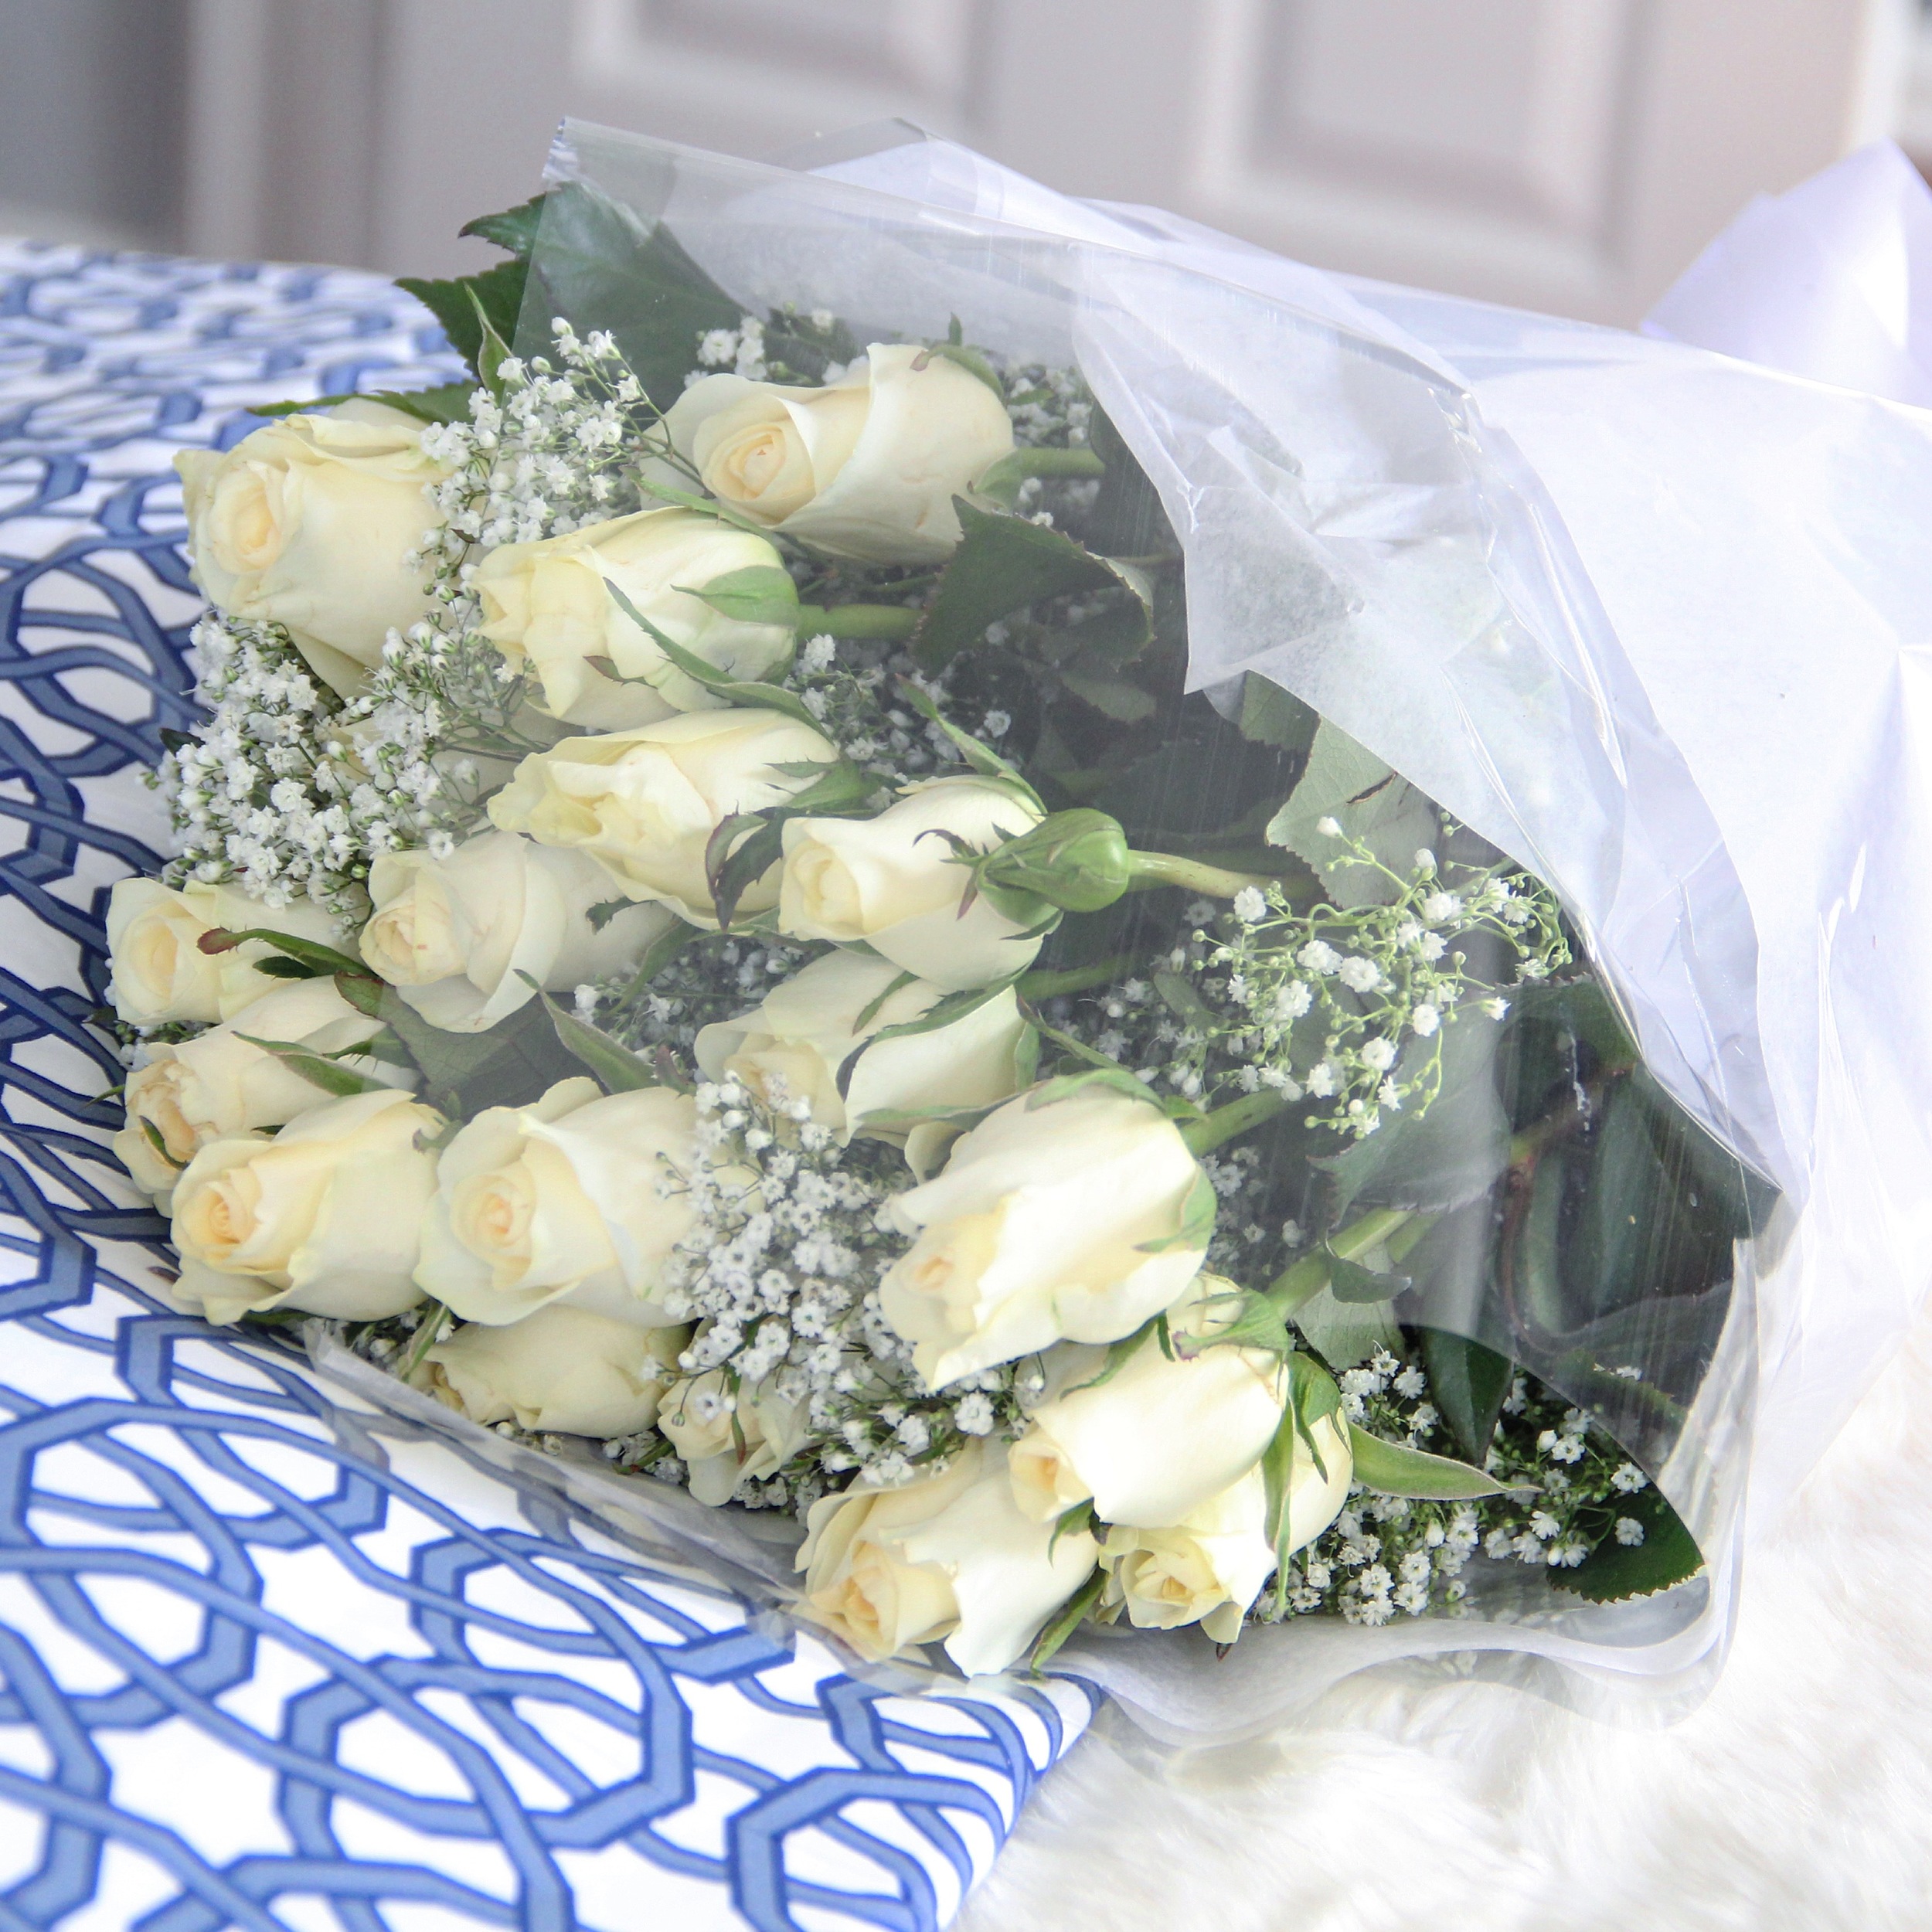 Union Square Fabric and roses.JPG